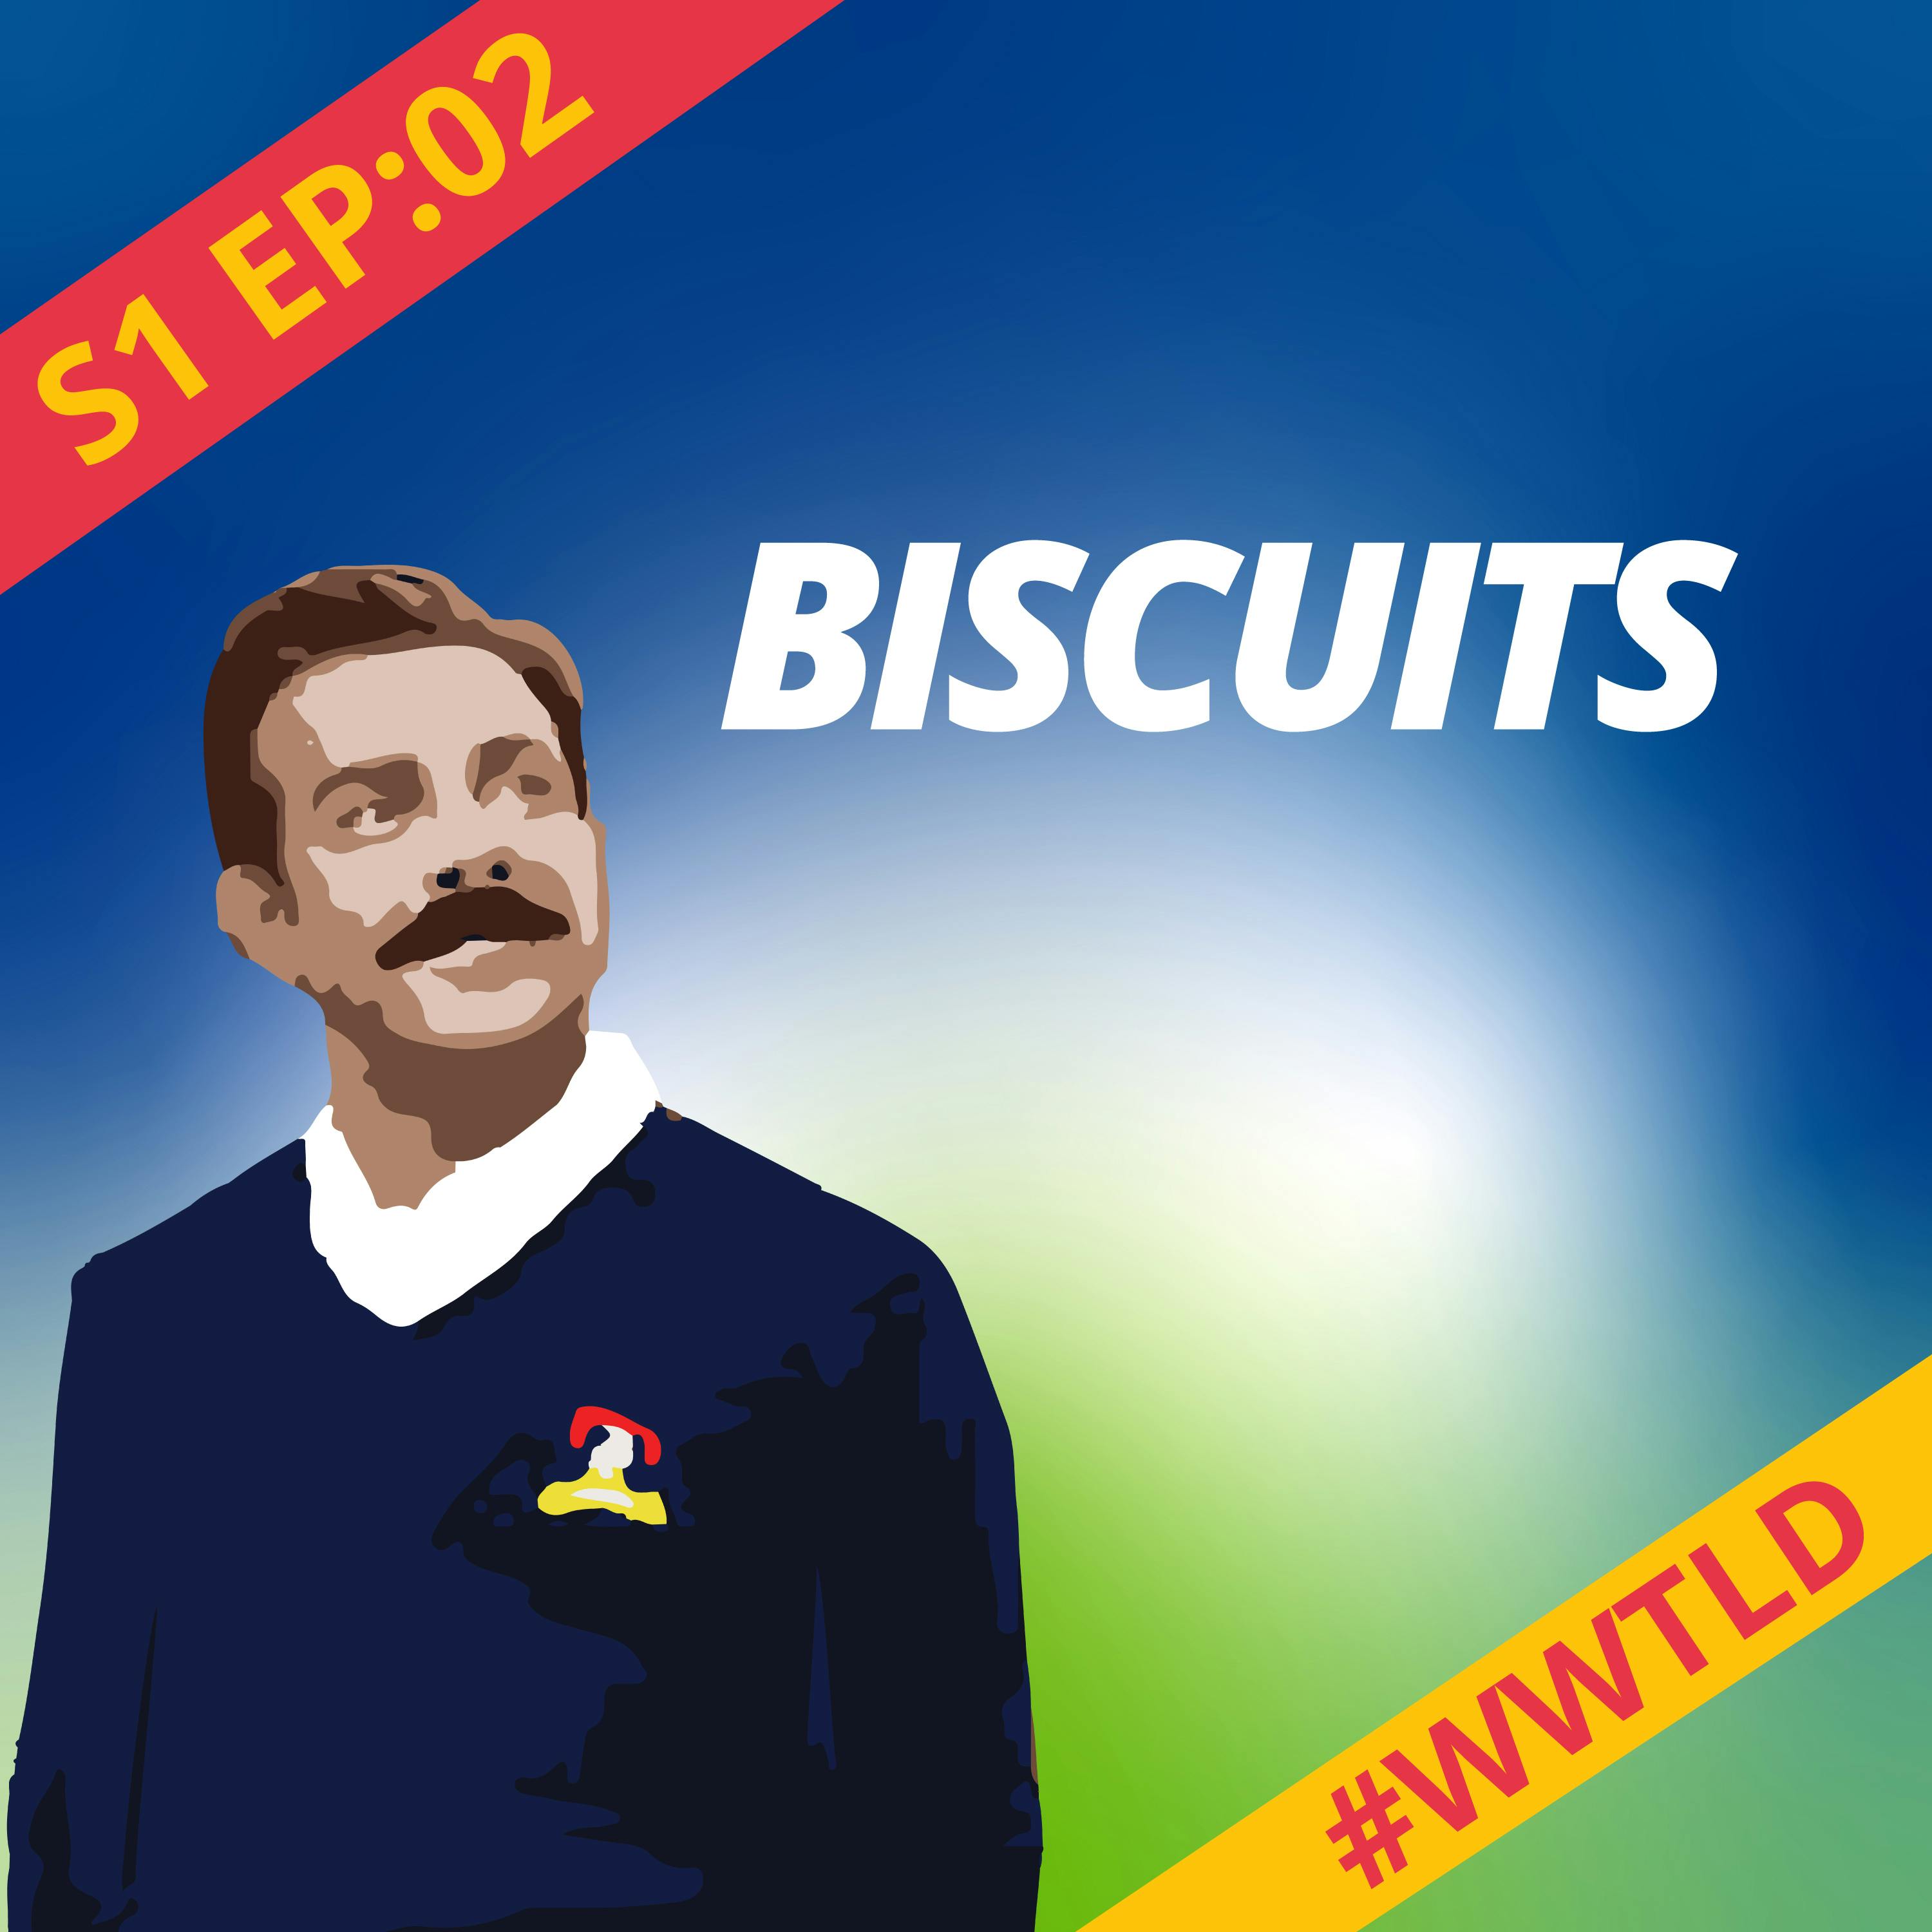 Biscuits Image